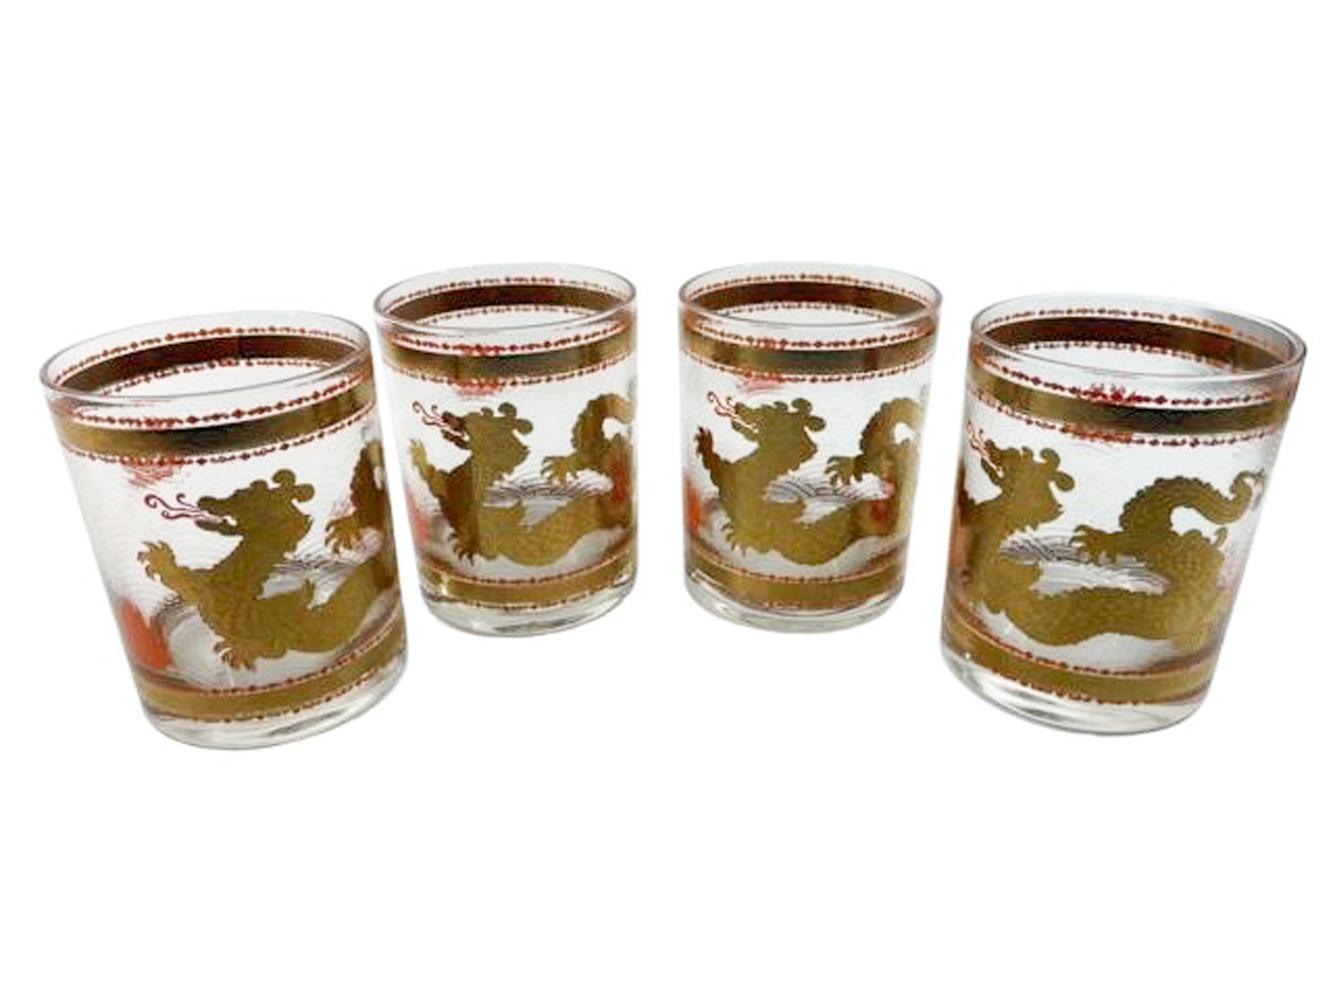 Four Large size vintage rocks glasses by Cera with a Golden Dragon chasing the 